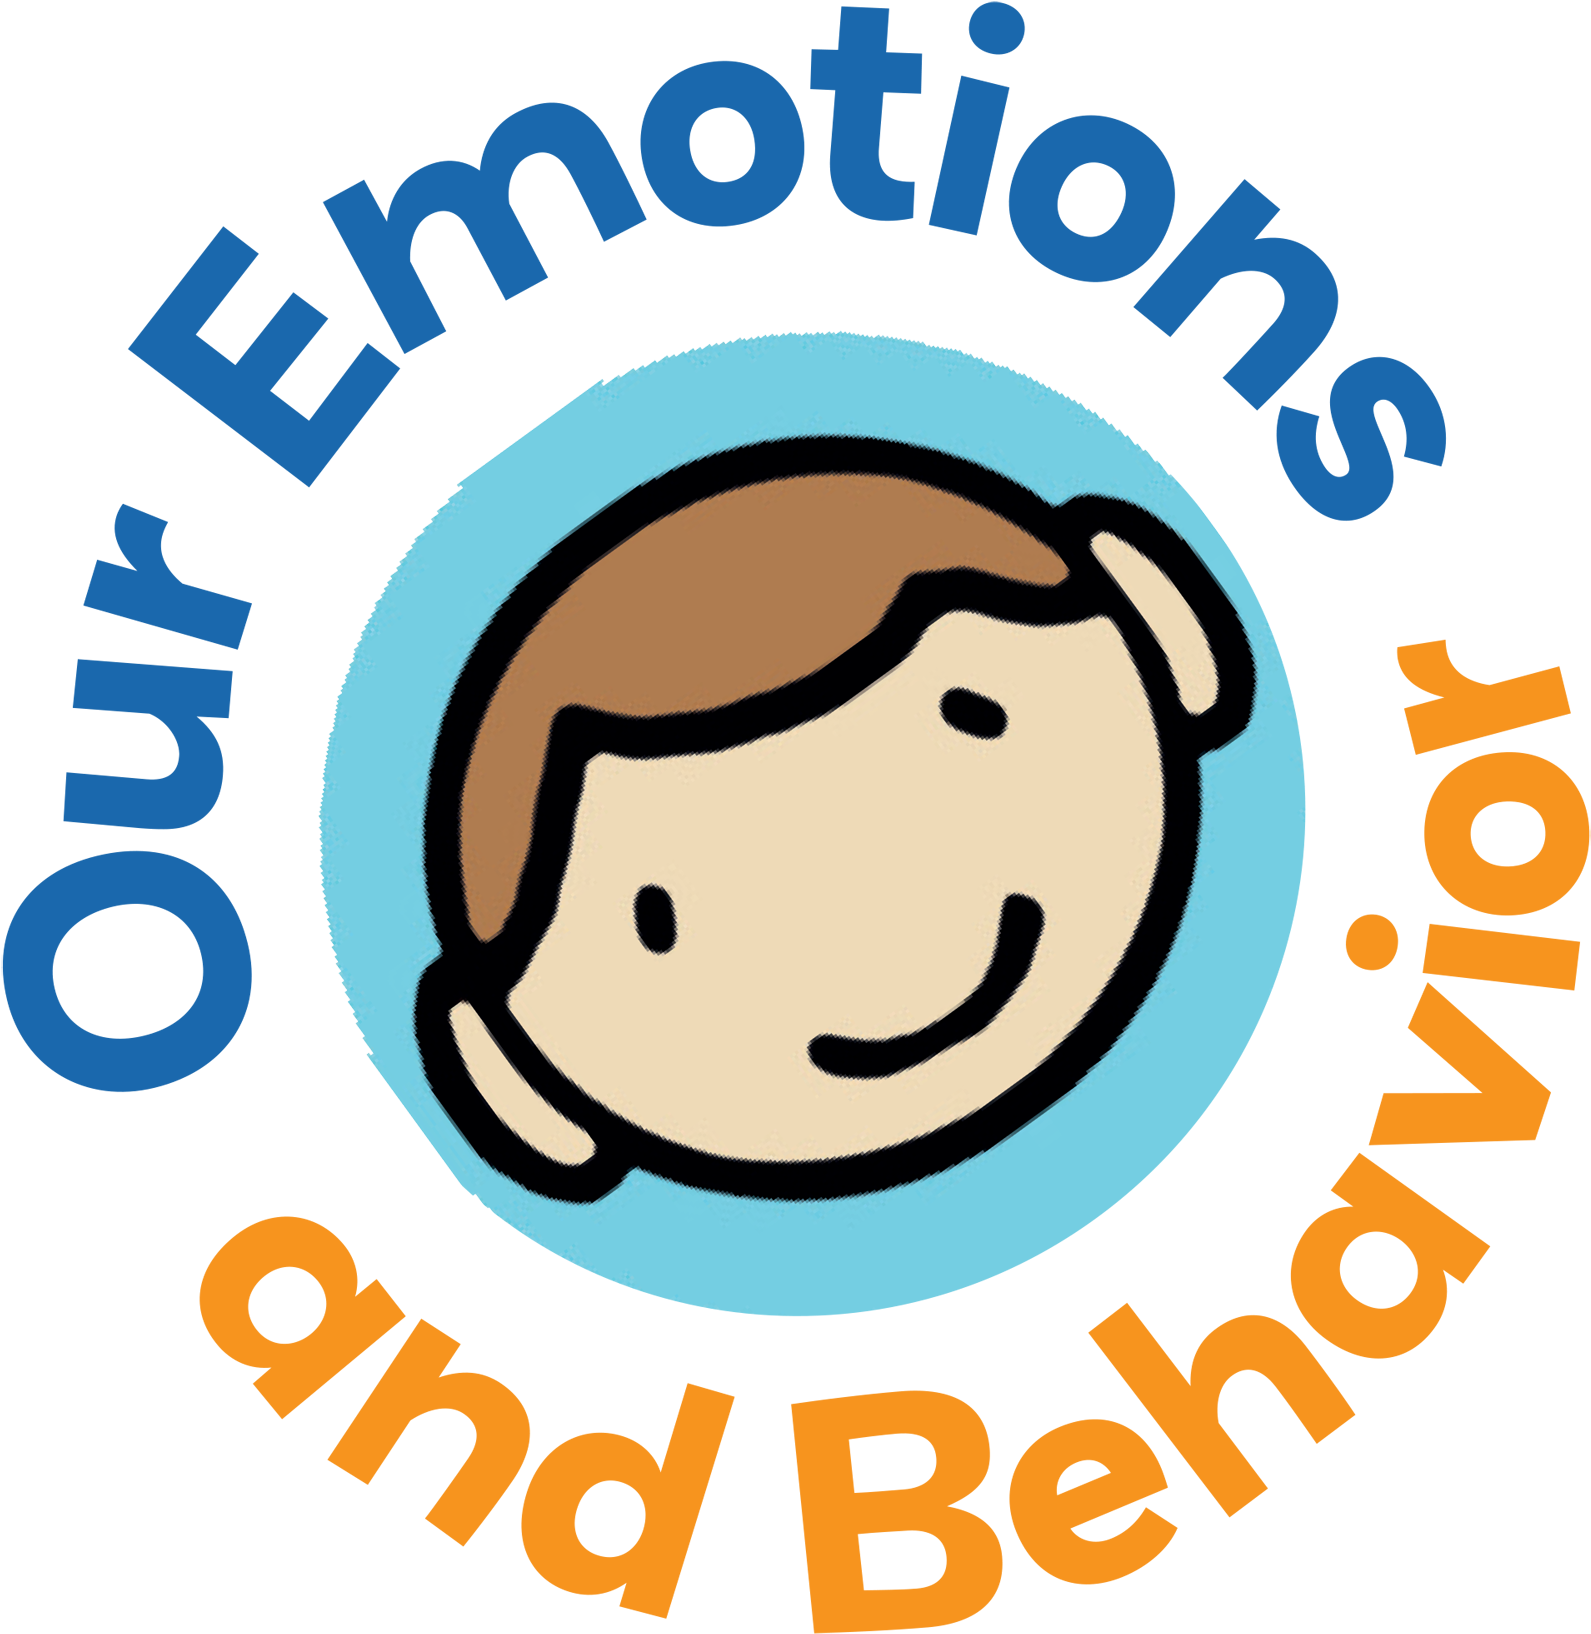 The Our Emotions And Behavior Series Uses Cheerful, - Turnfurlong Junior School Logo (1618x1949)